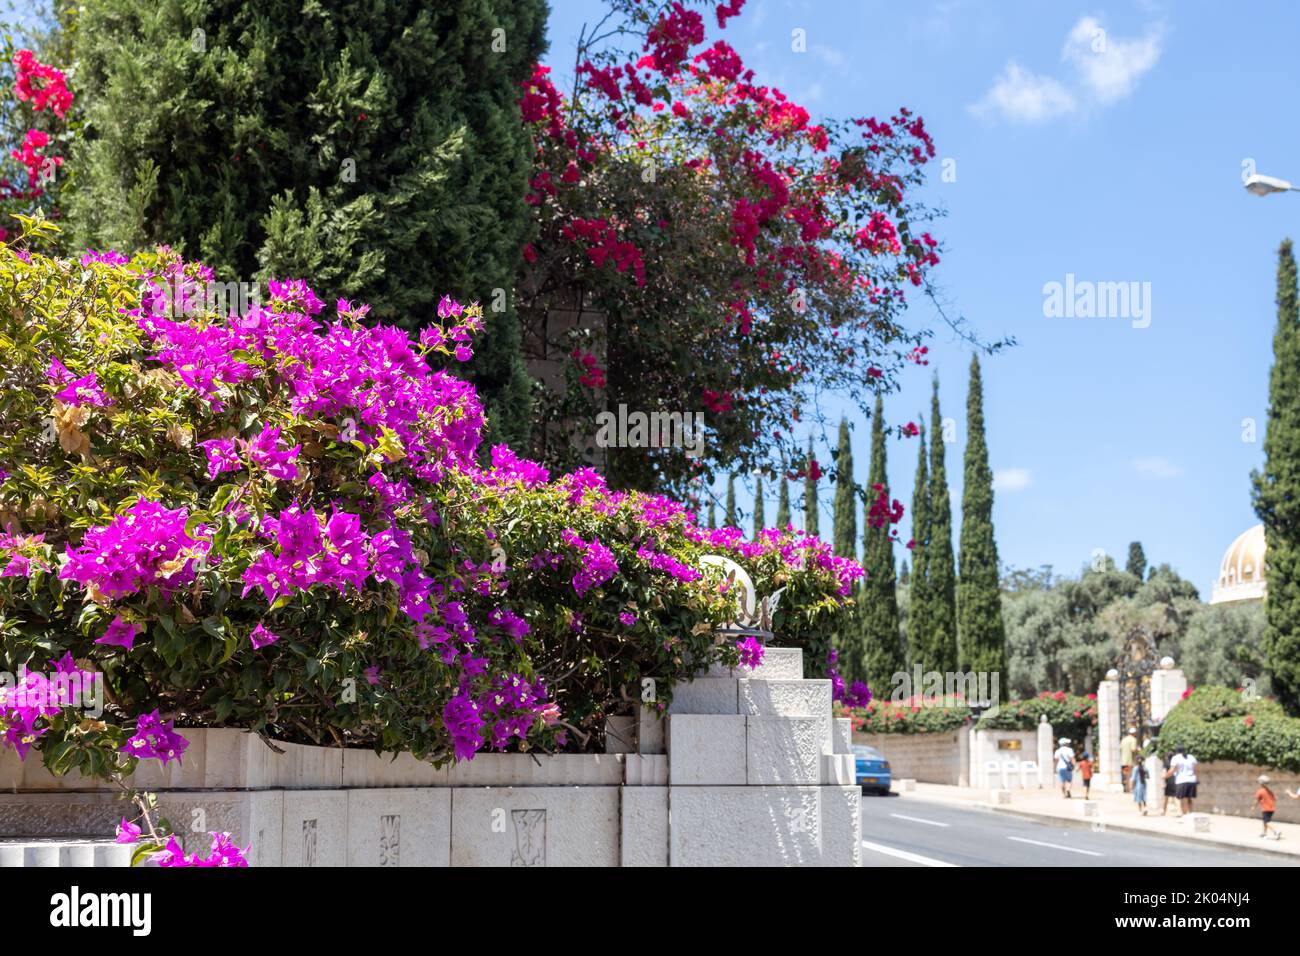 Haifa, Israel, July 12, 2022 : The decorative metal gate at the entrance to the middle terrace of the Bahai Garden, located on Mount Carmel in the cit Stock Photo